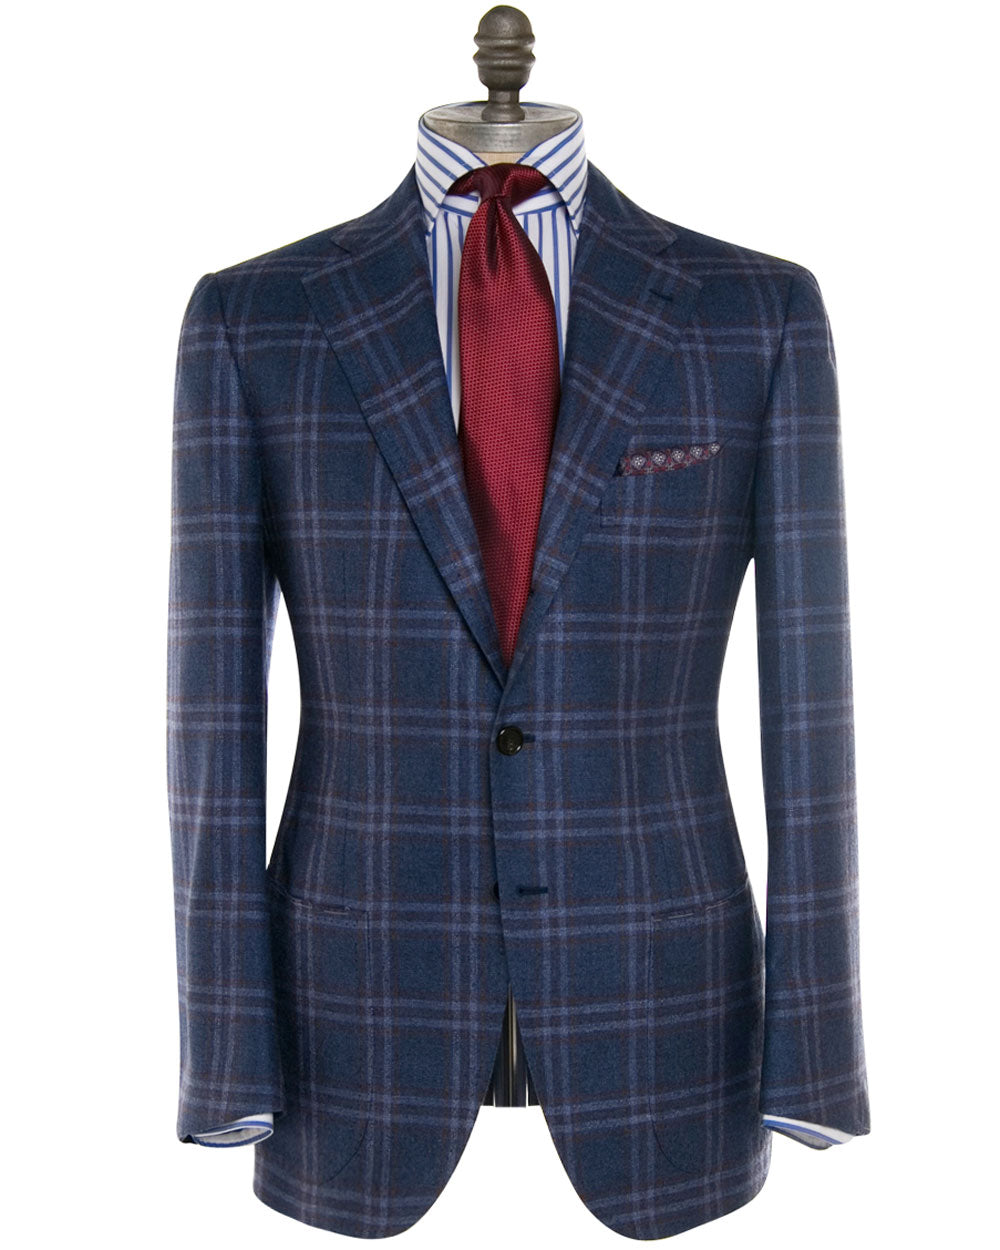 Blue and Rust Plaid Sportcoat